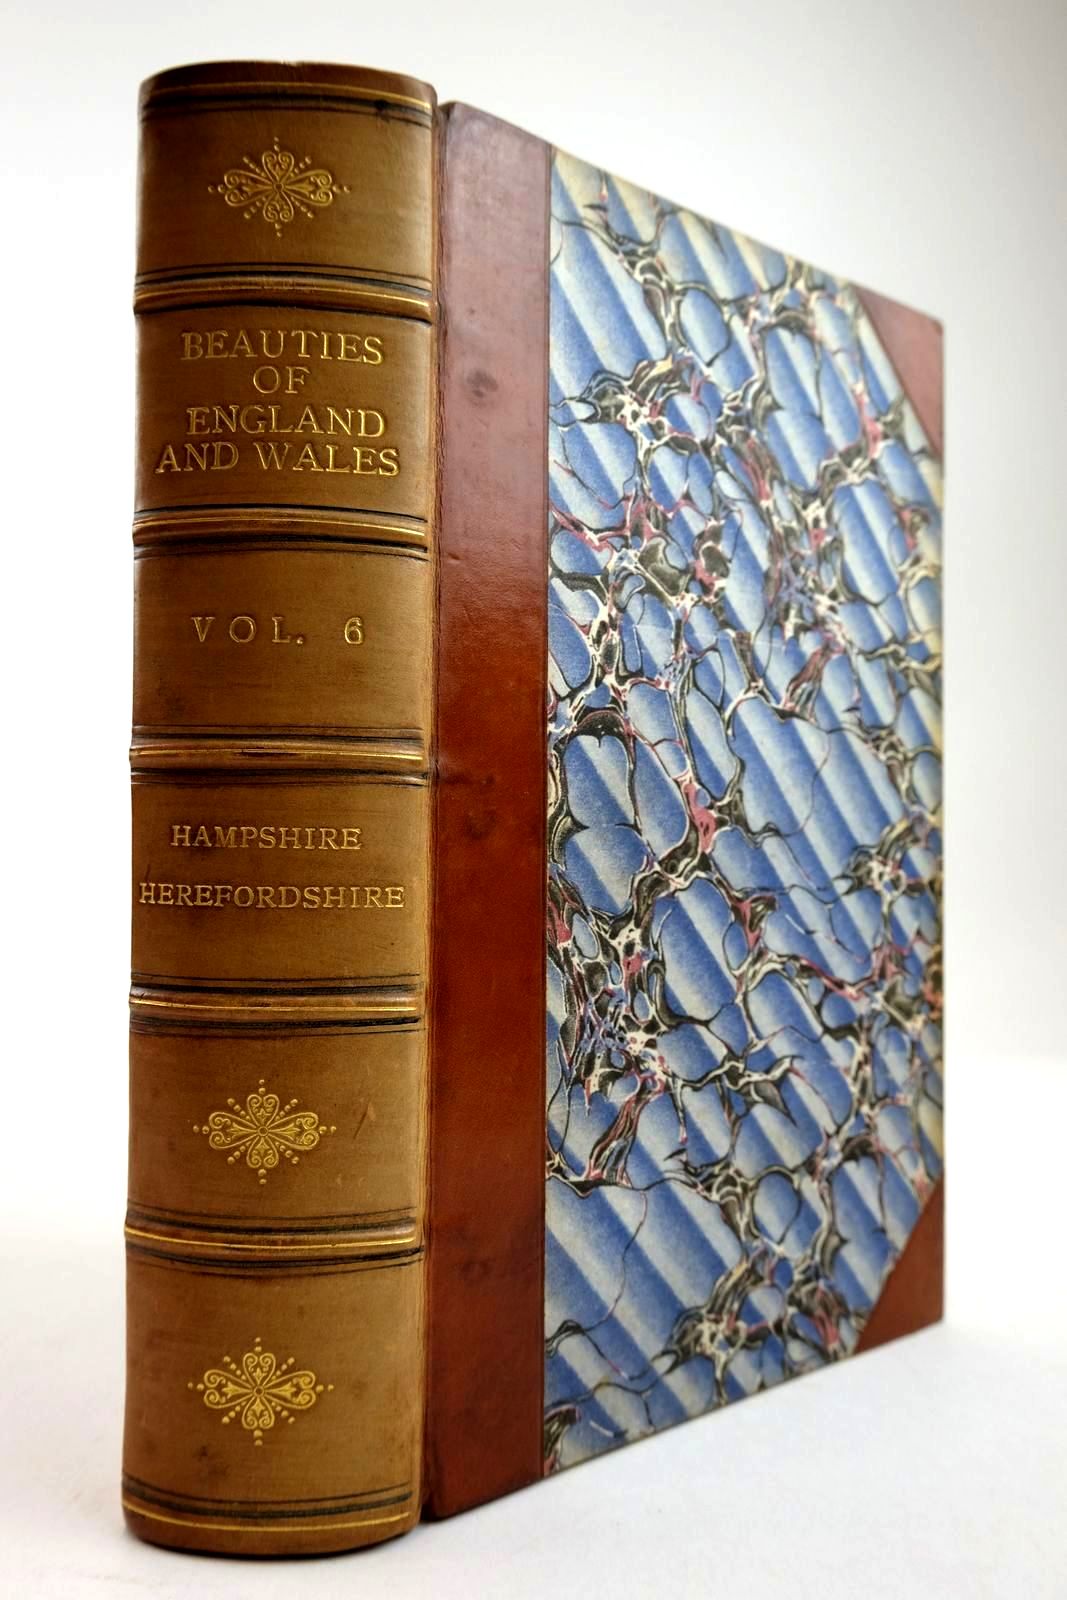 Photo of THE BEAUTIES OF ENGLAND AND WALES VOL VI written by Britton, John
Brayley, Edward Wedlake published by Vernor & Hood (STOCK CODE: 2134256)  for sale by Stella & Rose's Books